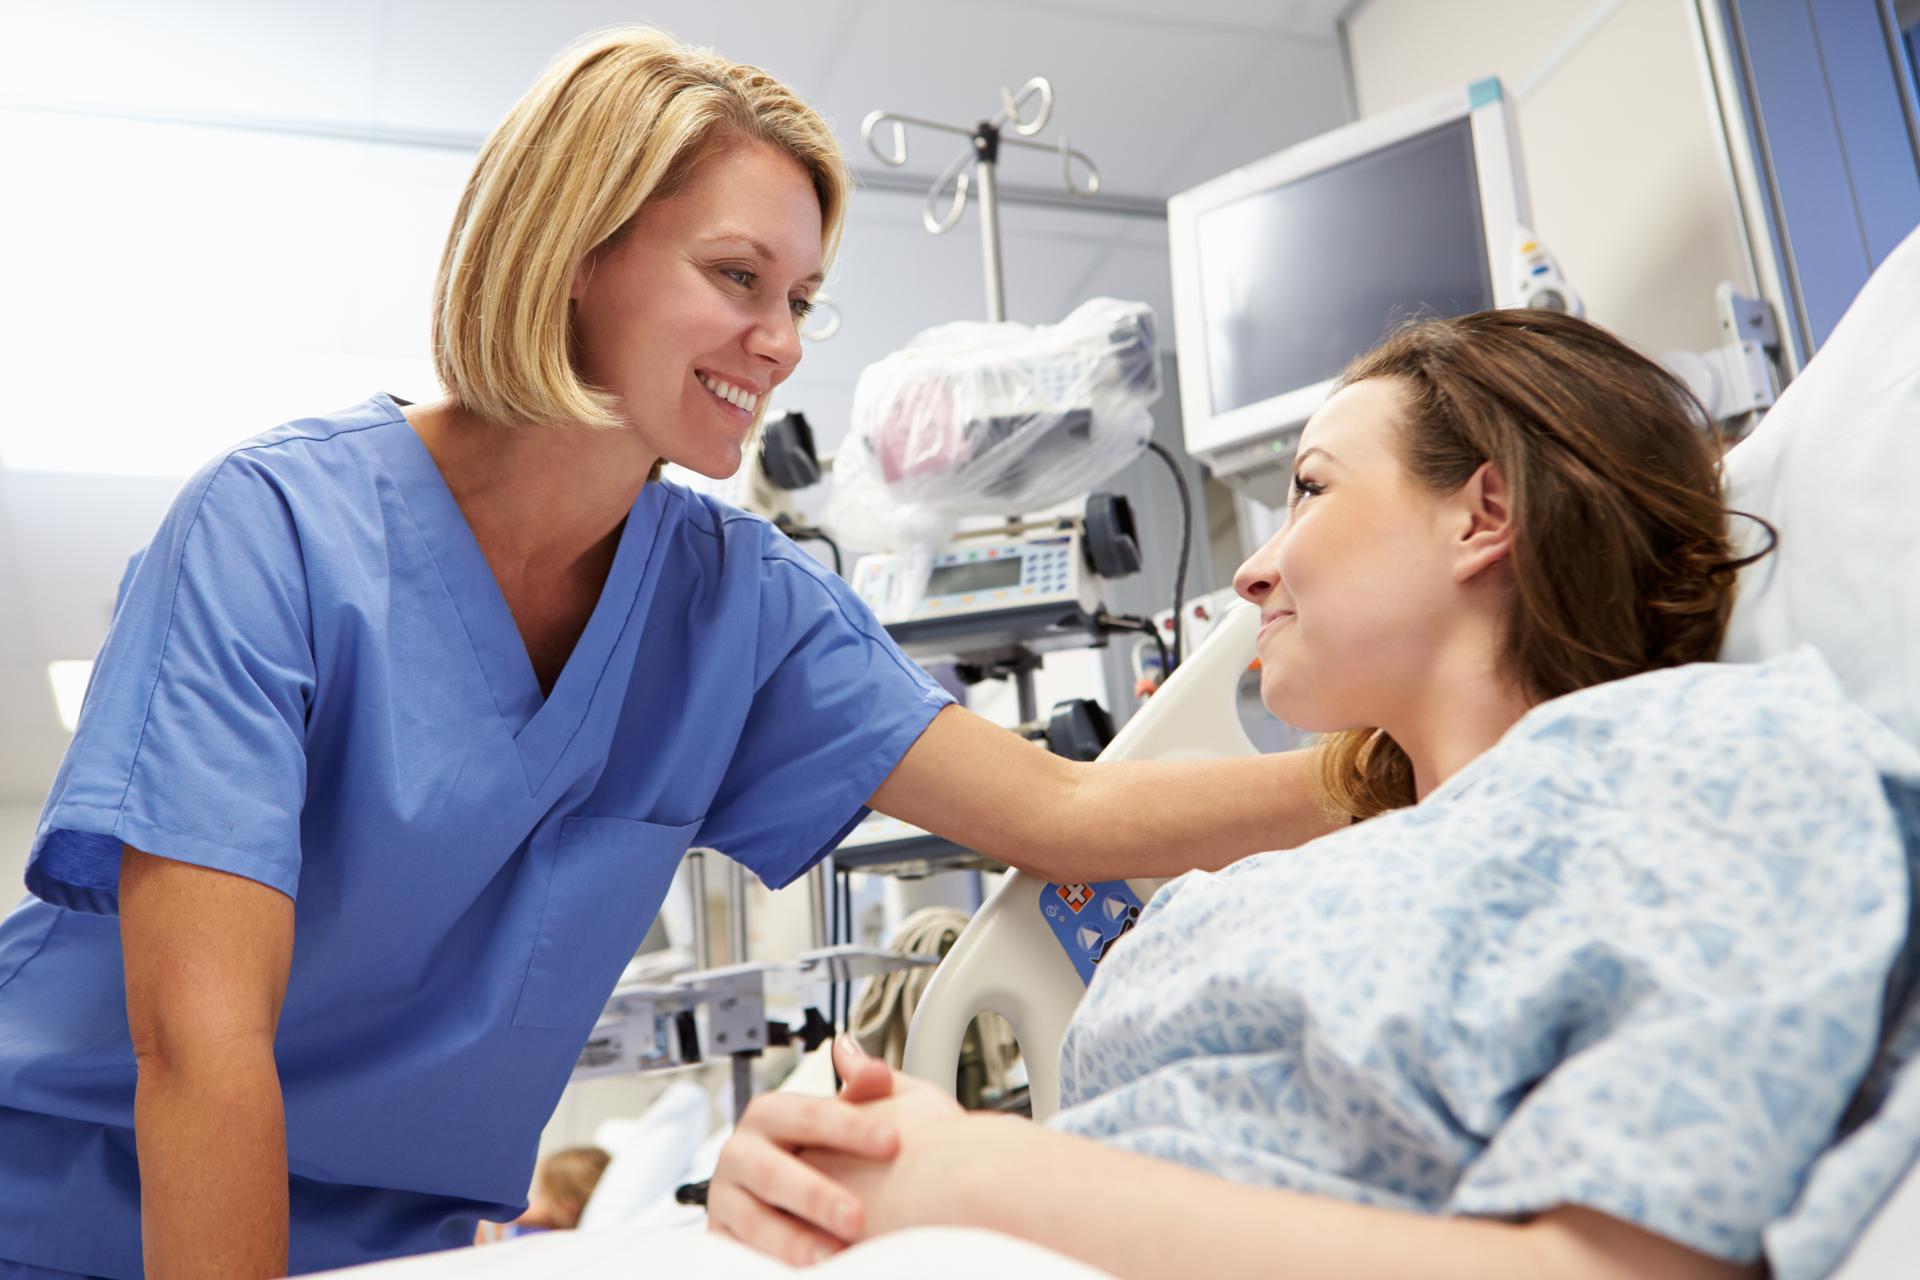 A nurse provides comfort and care at a patient's bedside in the Emergency Medicine department